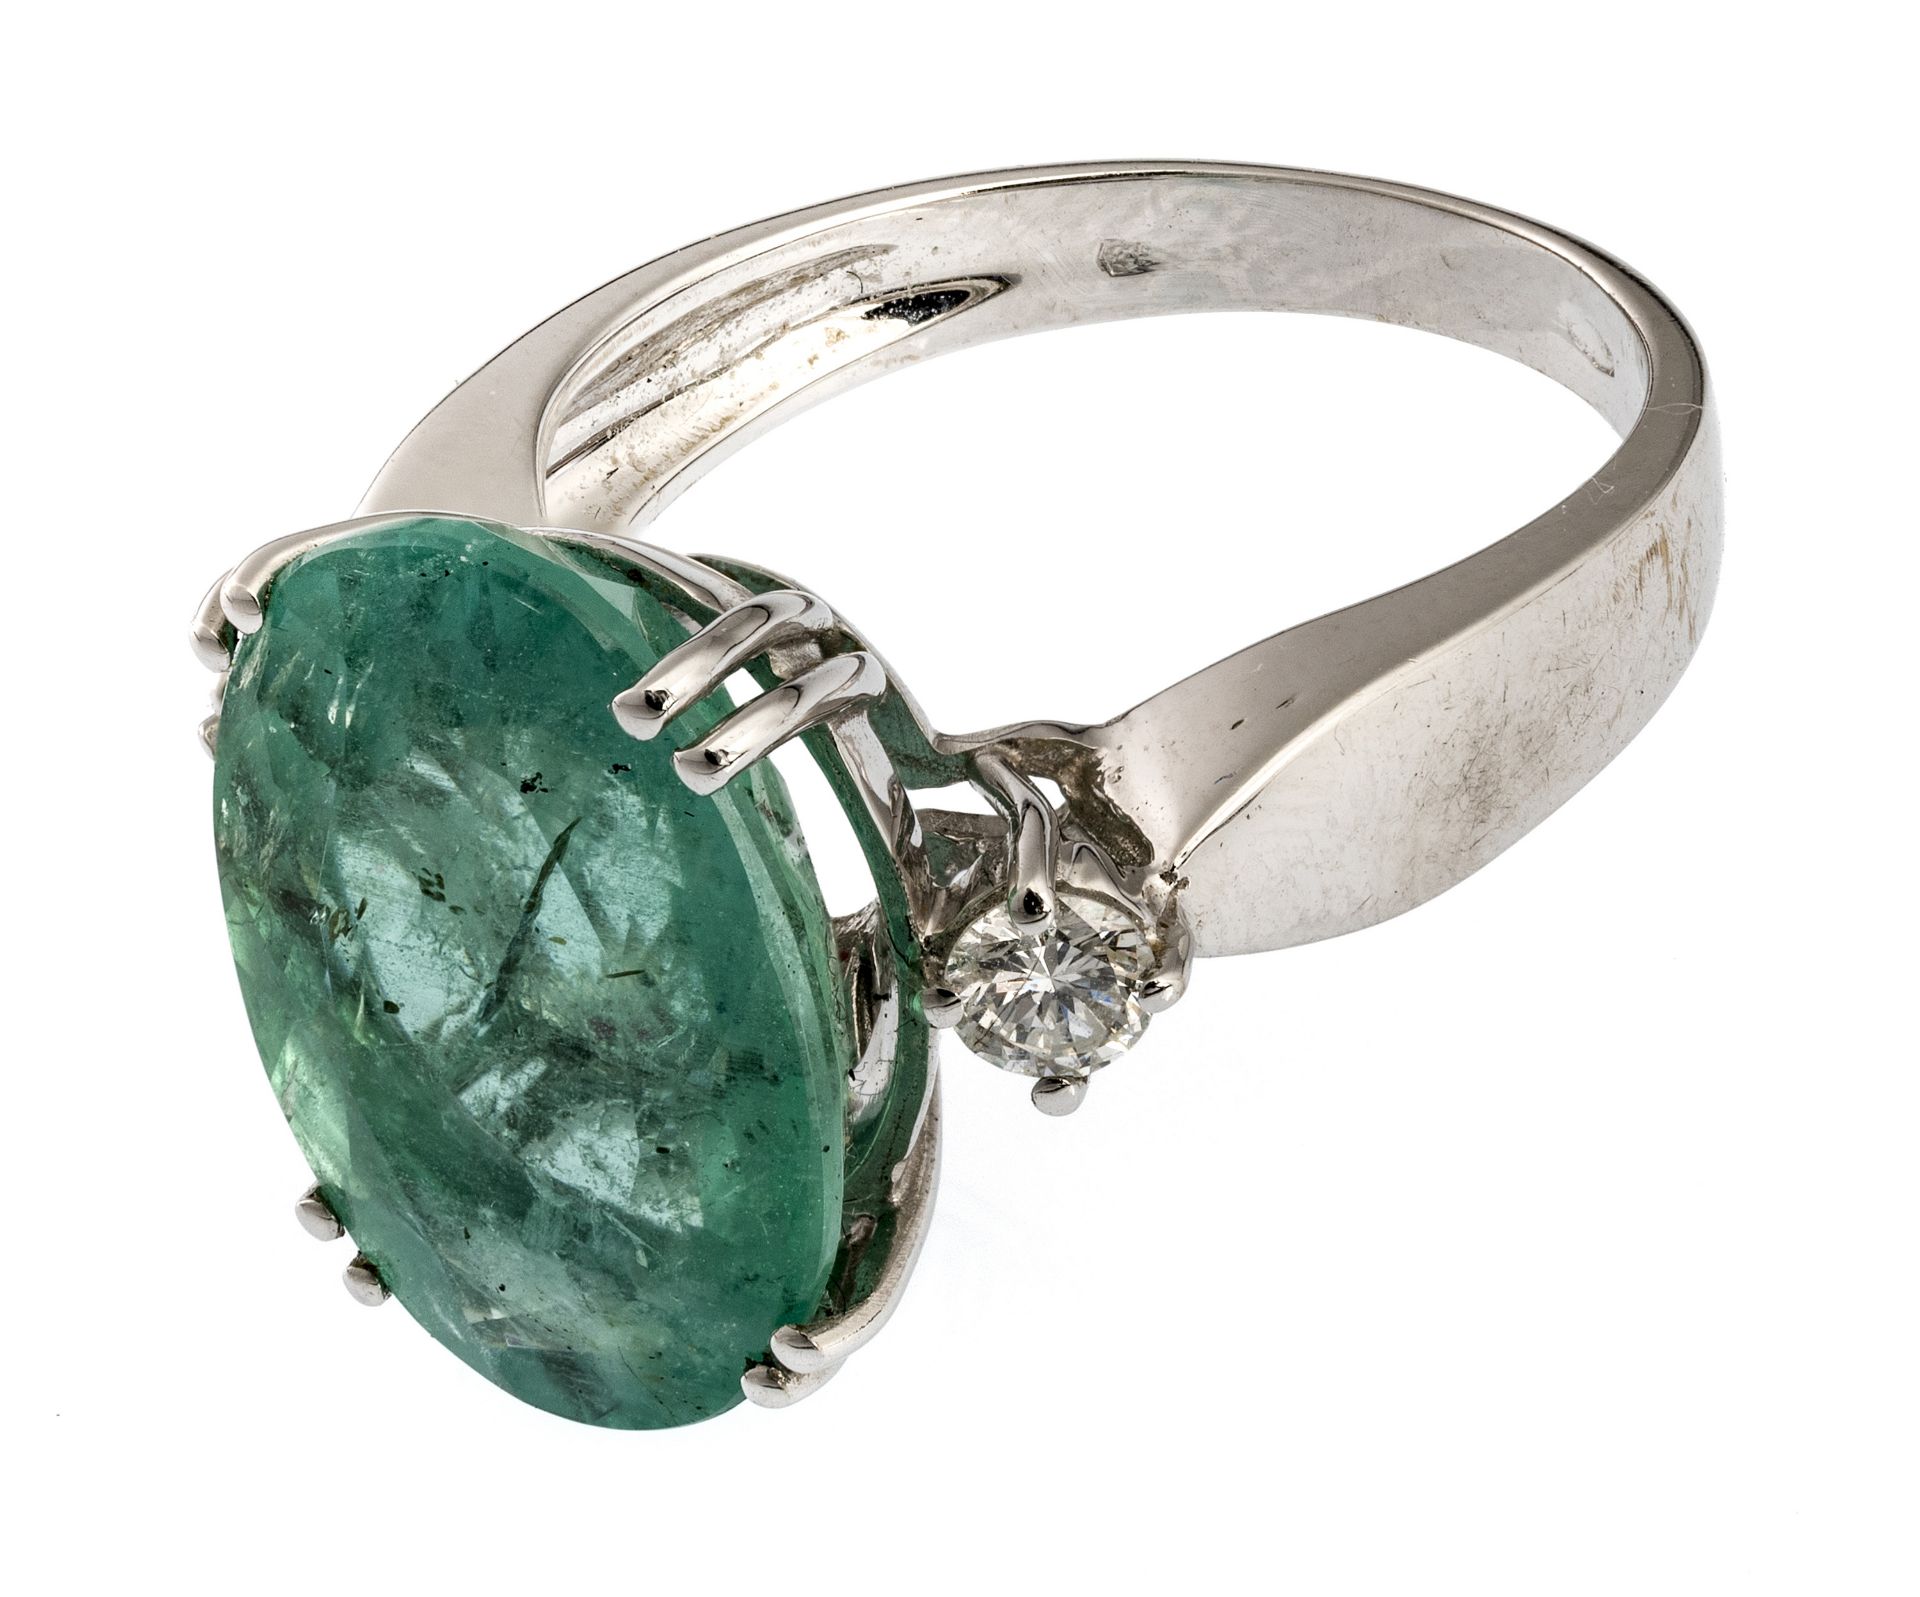 MAGNIFICENT WHITE GOLD RING WITH EMERALD AND DIAMONDS